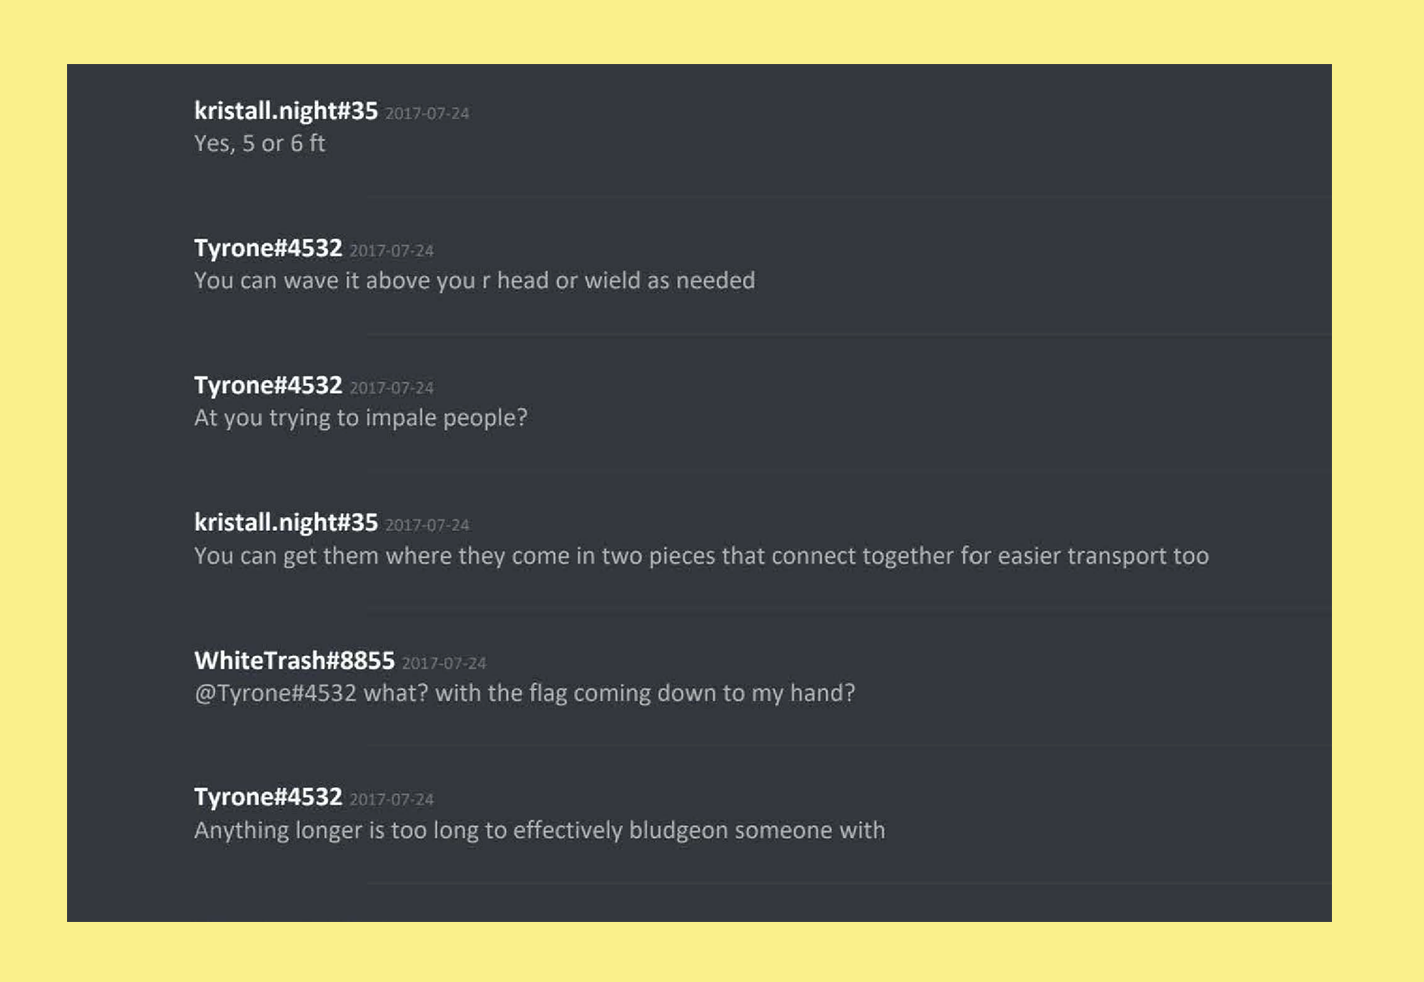 Discord exchange in which Michael Chesny provides advice on using a flagpole as a weapon